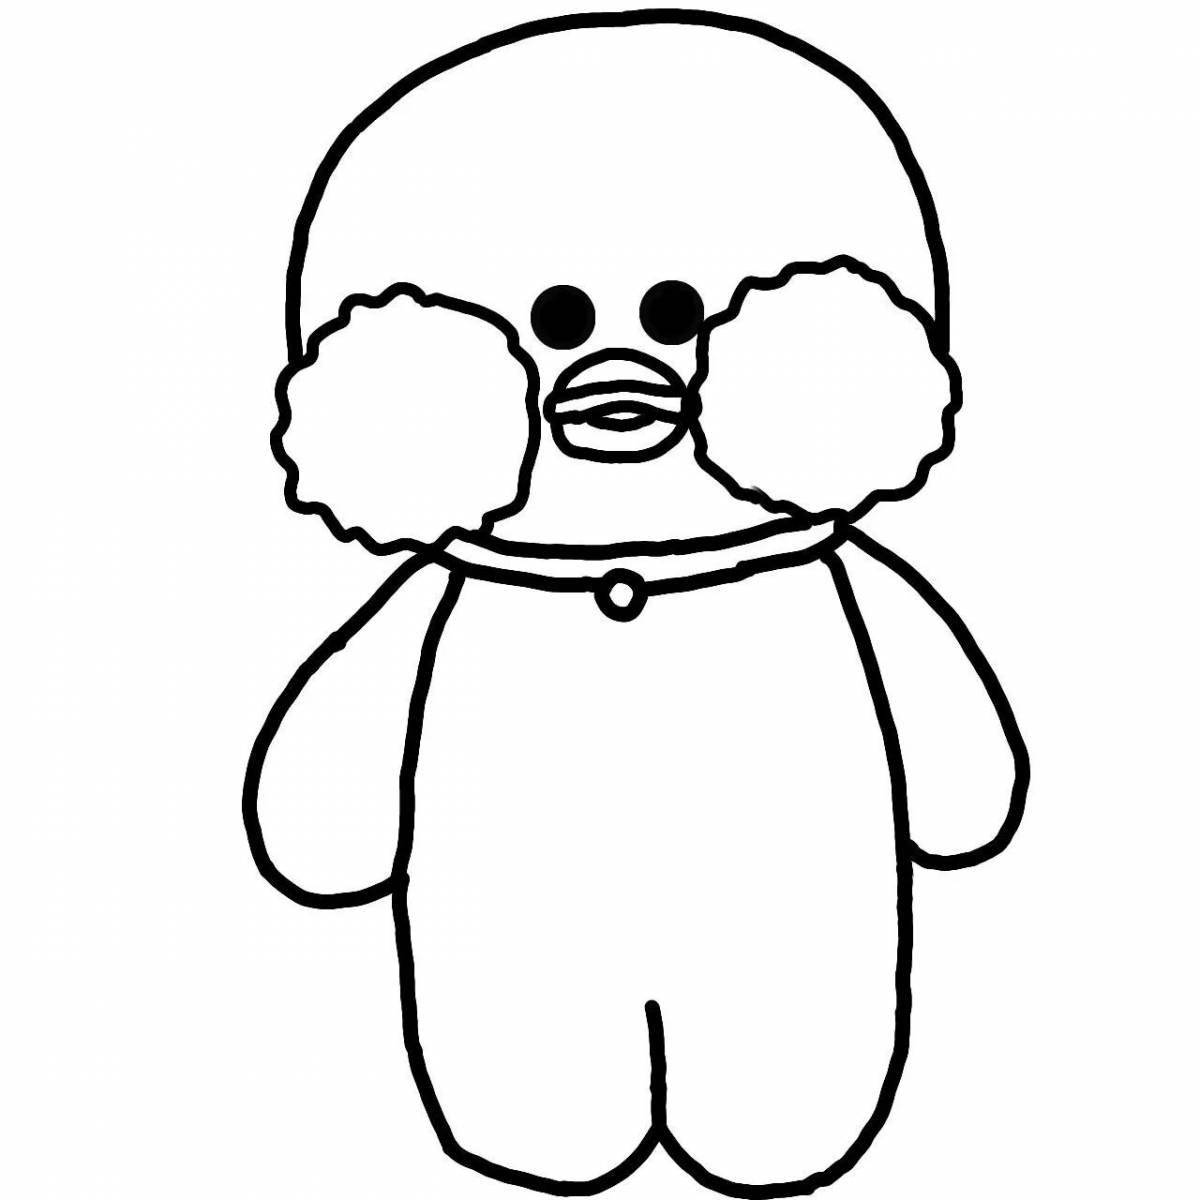 Colorful lalafoe duck coloring page